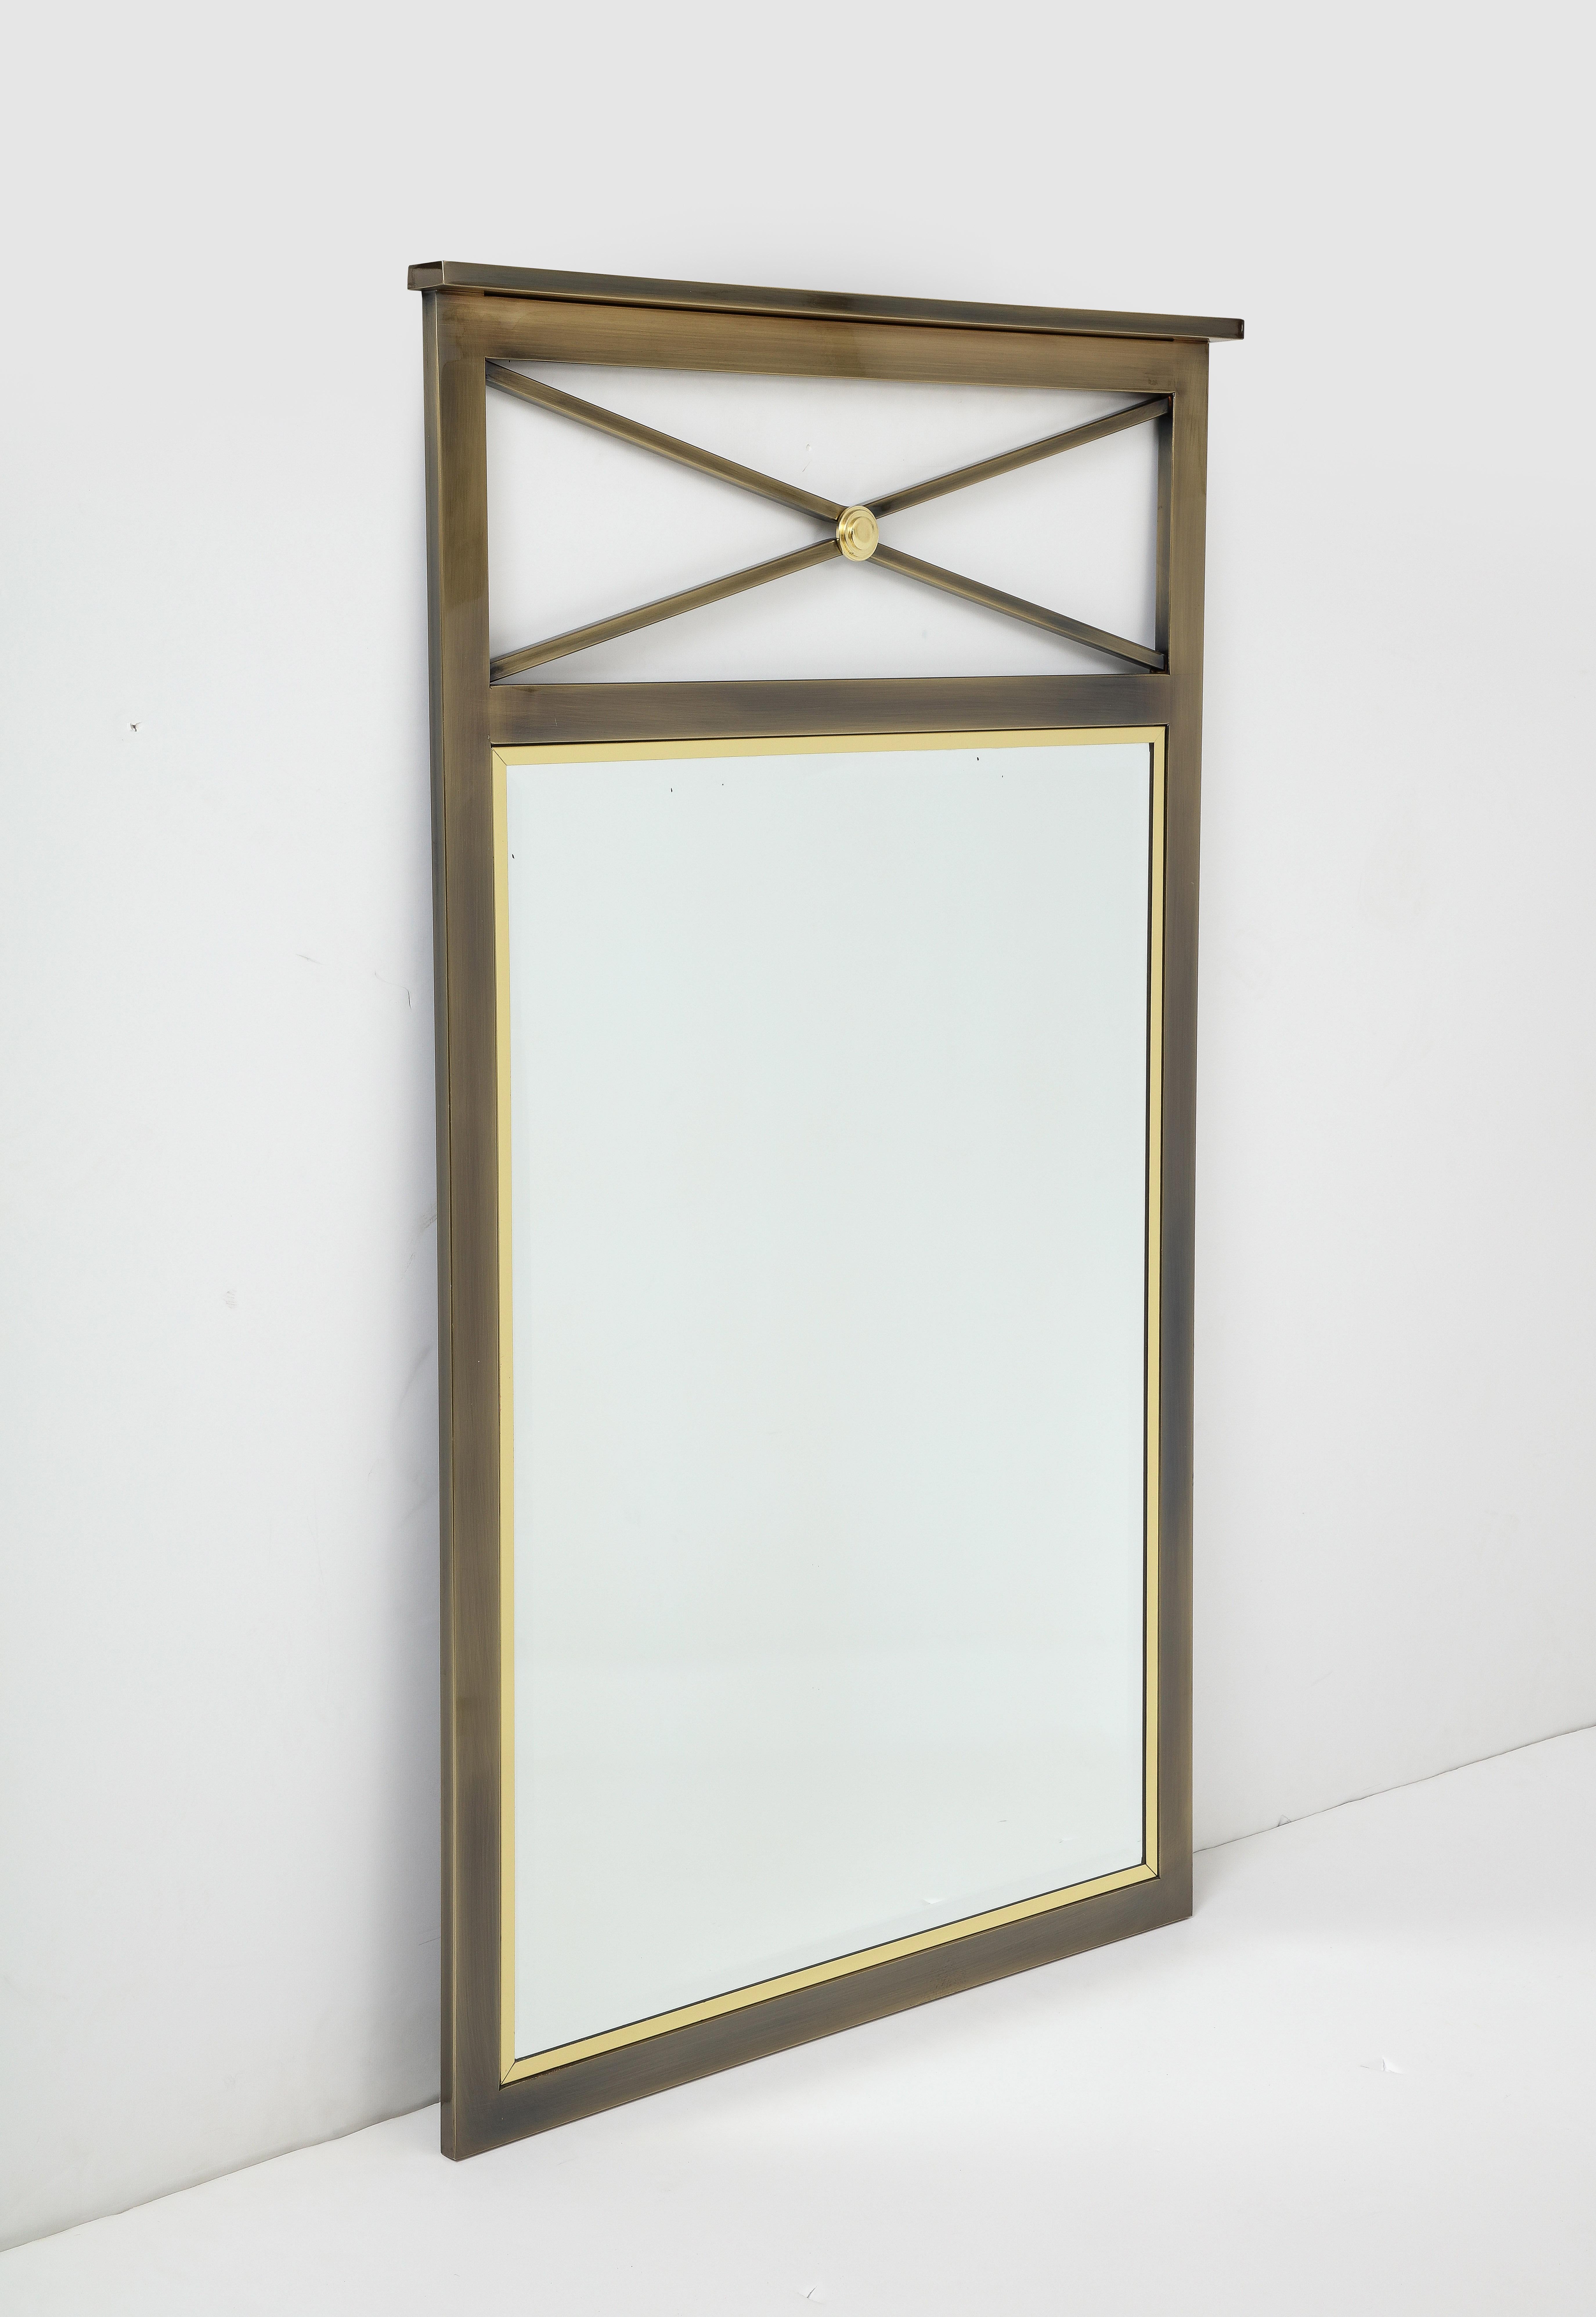 Midcentury neoclassical influenced mirror surrounded by brass trim and a bronze frame, made by Design Institute of America.